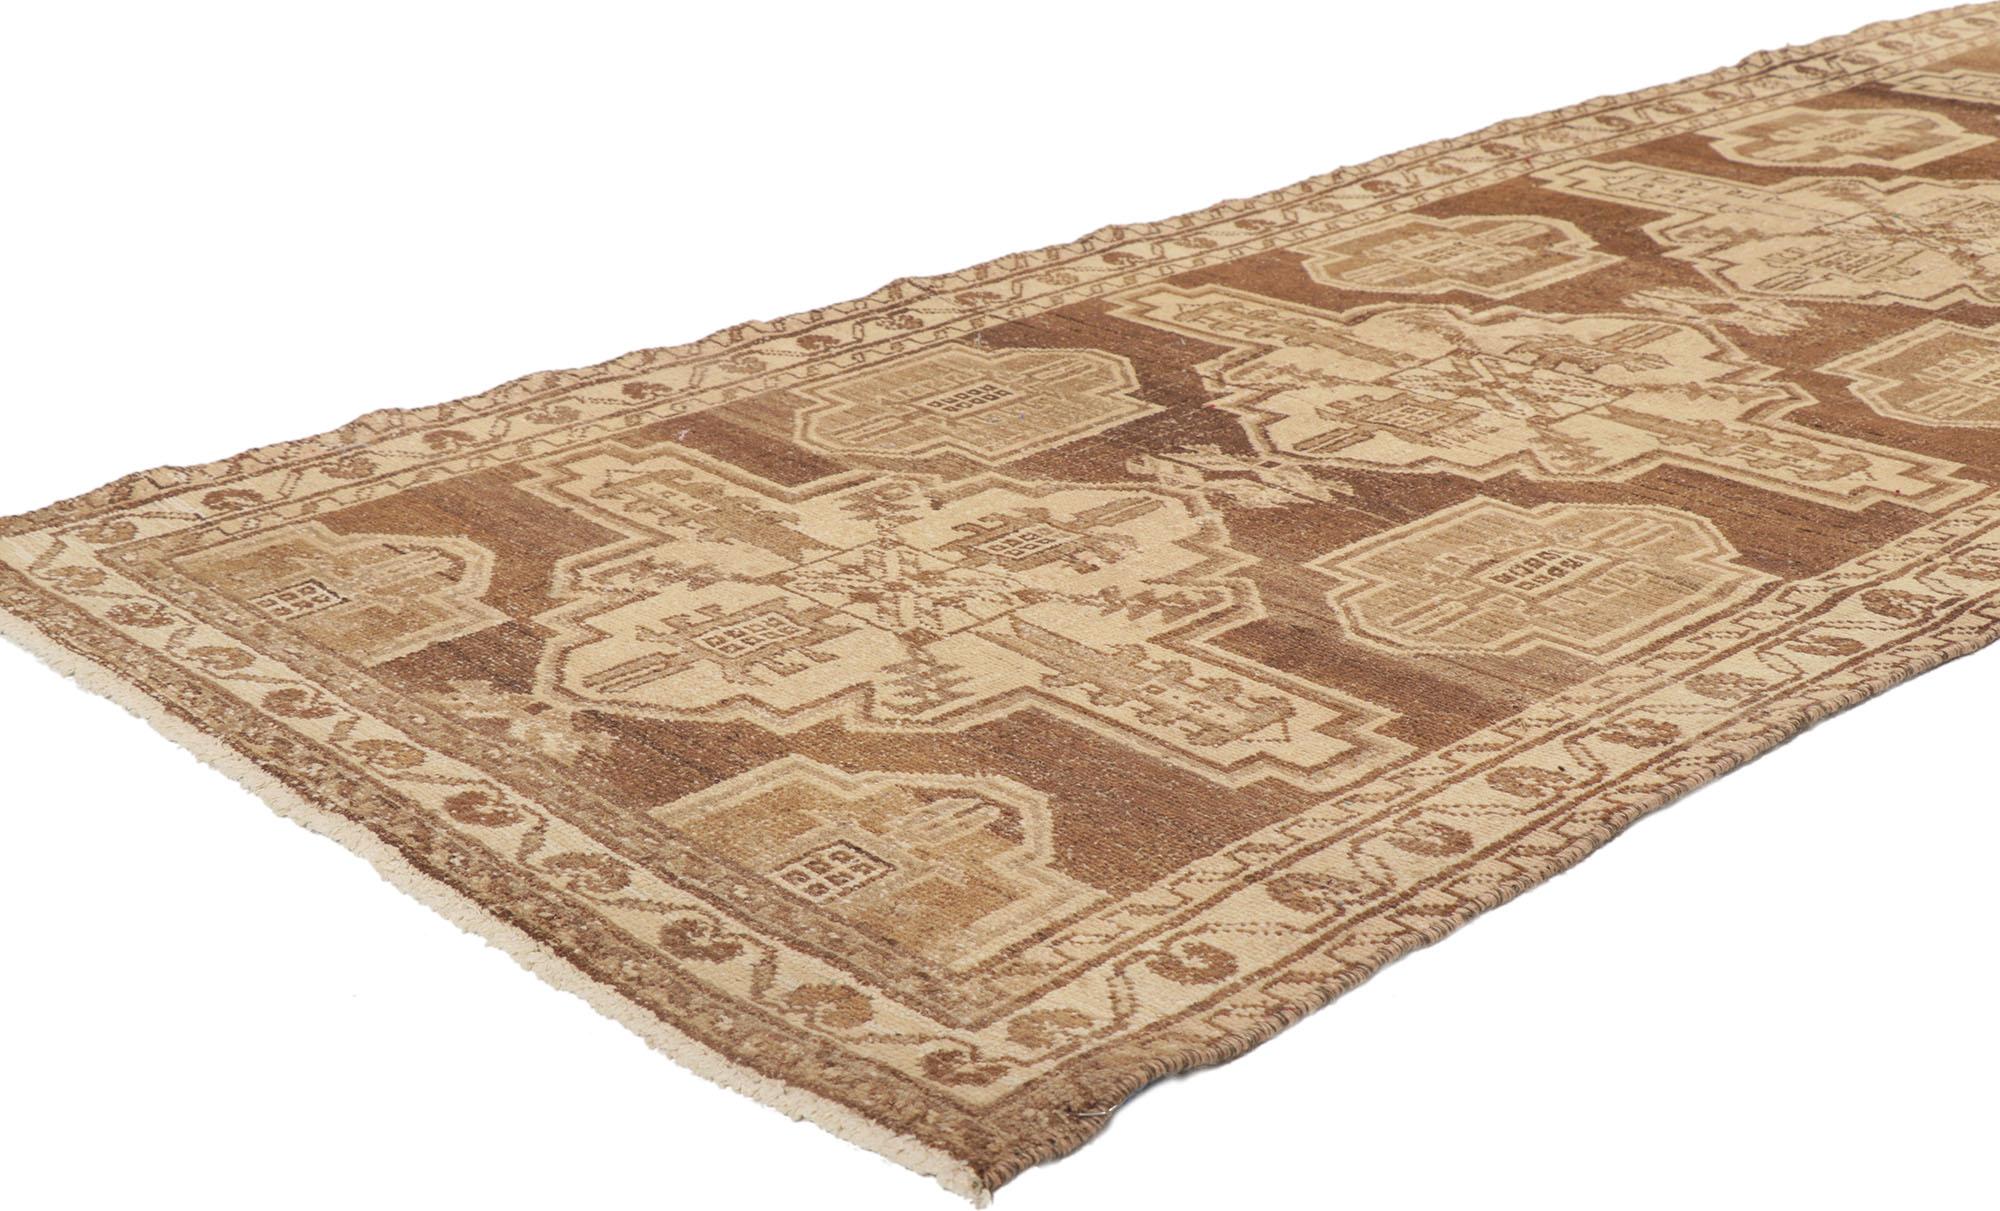 53757 Antique Persian Malayer runner, 03'03 x 09'09. Perfect for a hallway, long entry, grand foyer, designer entryway, galley kitchen, corridor, long stair landing, grand parlor, home office, private library, conservatory, wine cellar, executive